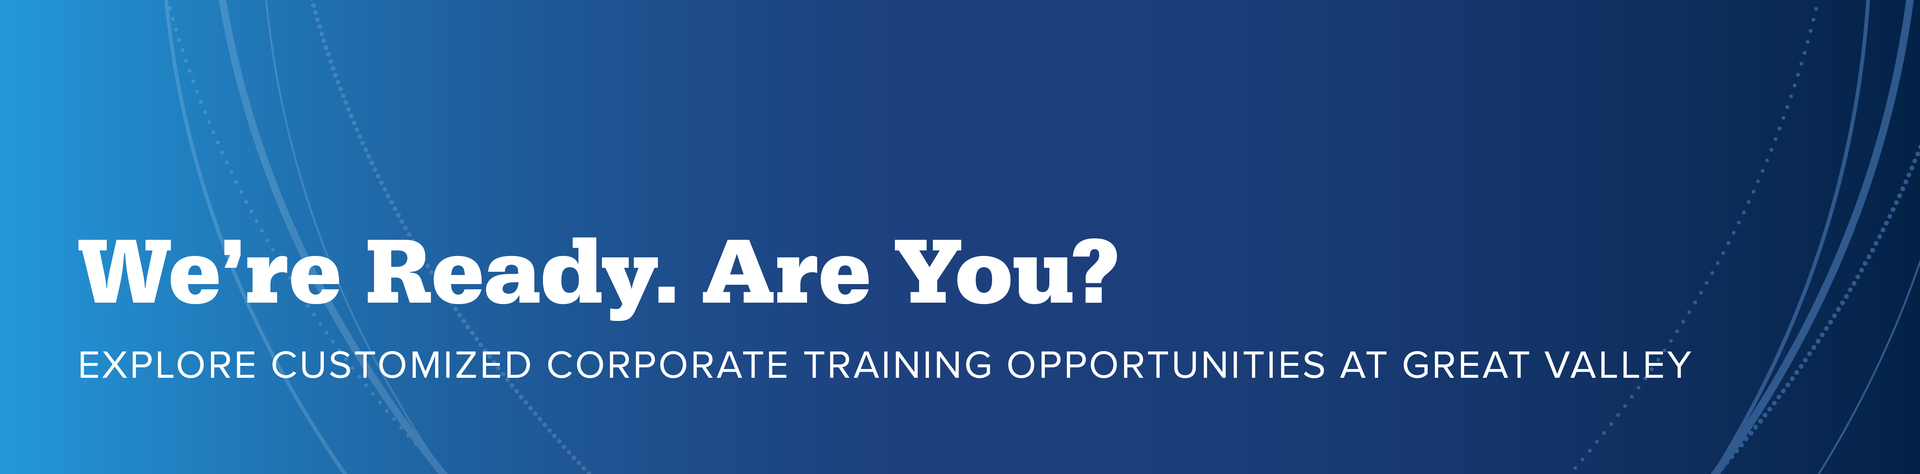 Header with Text "We're Ready. Are You? Explore Customized Corporate Training Opportunities at Great Valley